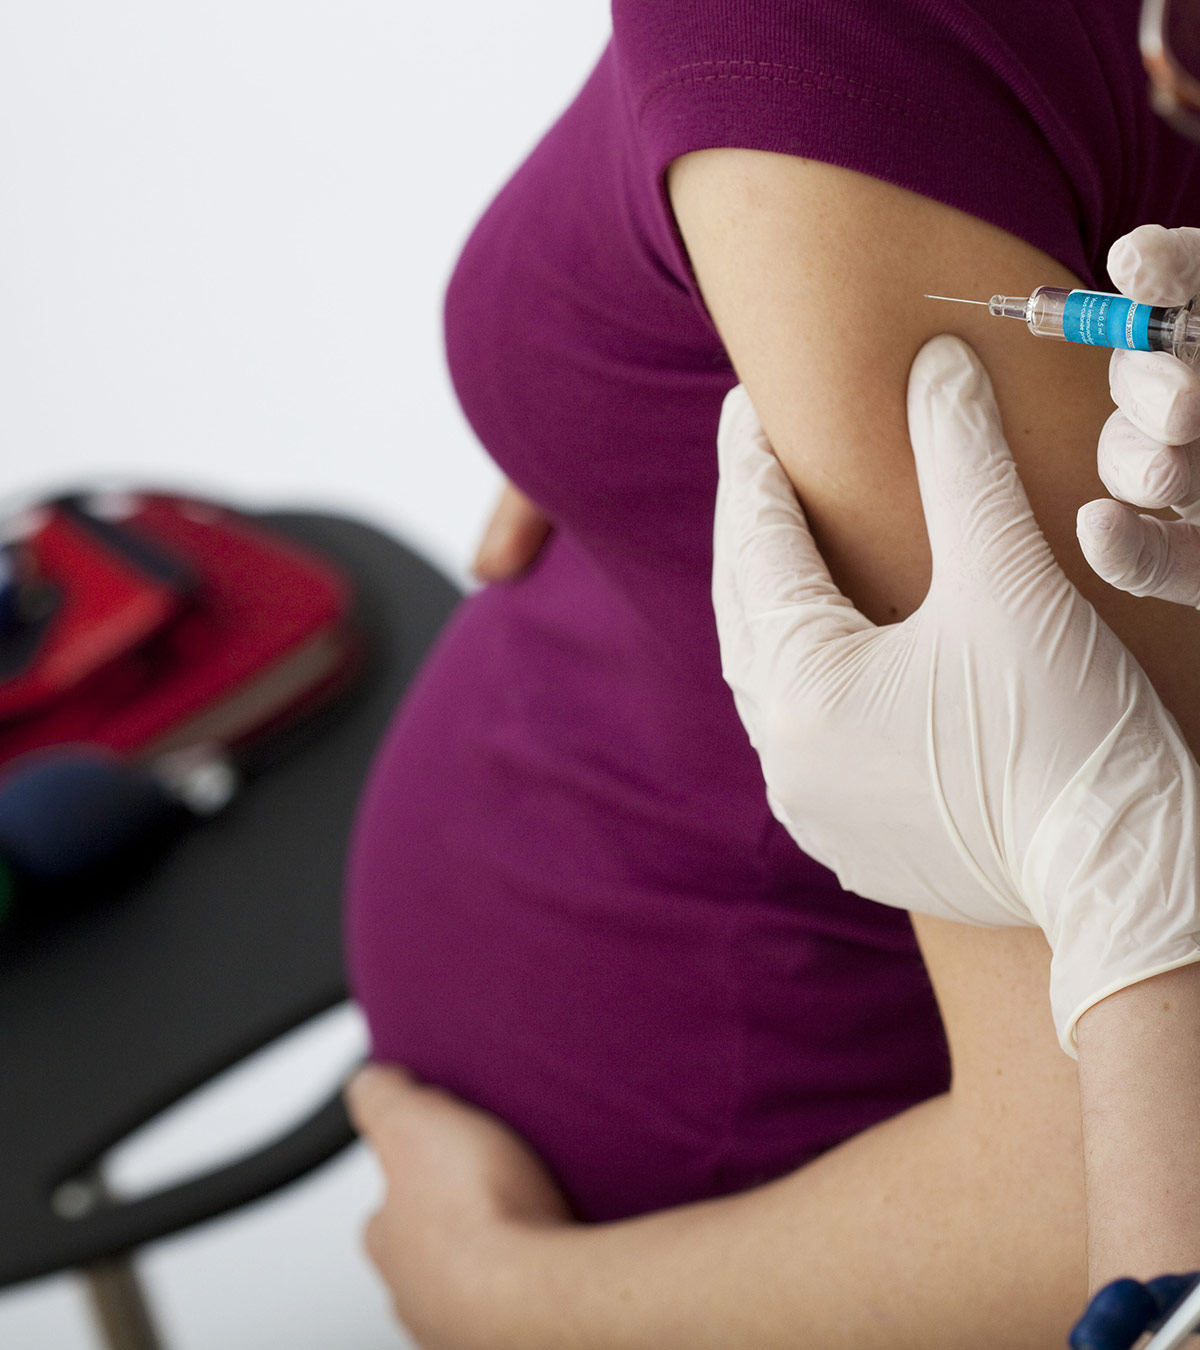 TTInjection In Pregnancy: Safety, Dosage And Side Effects